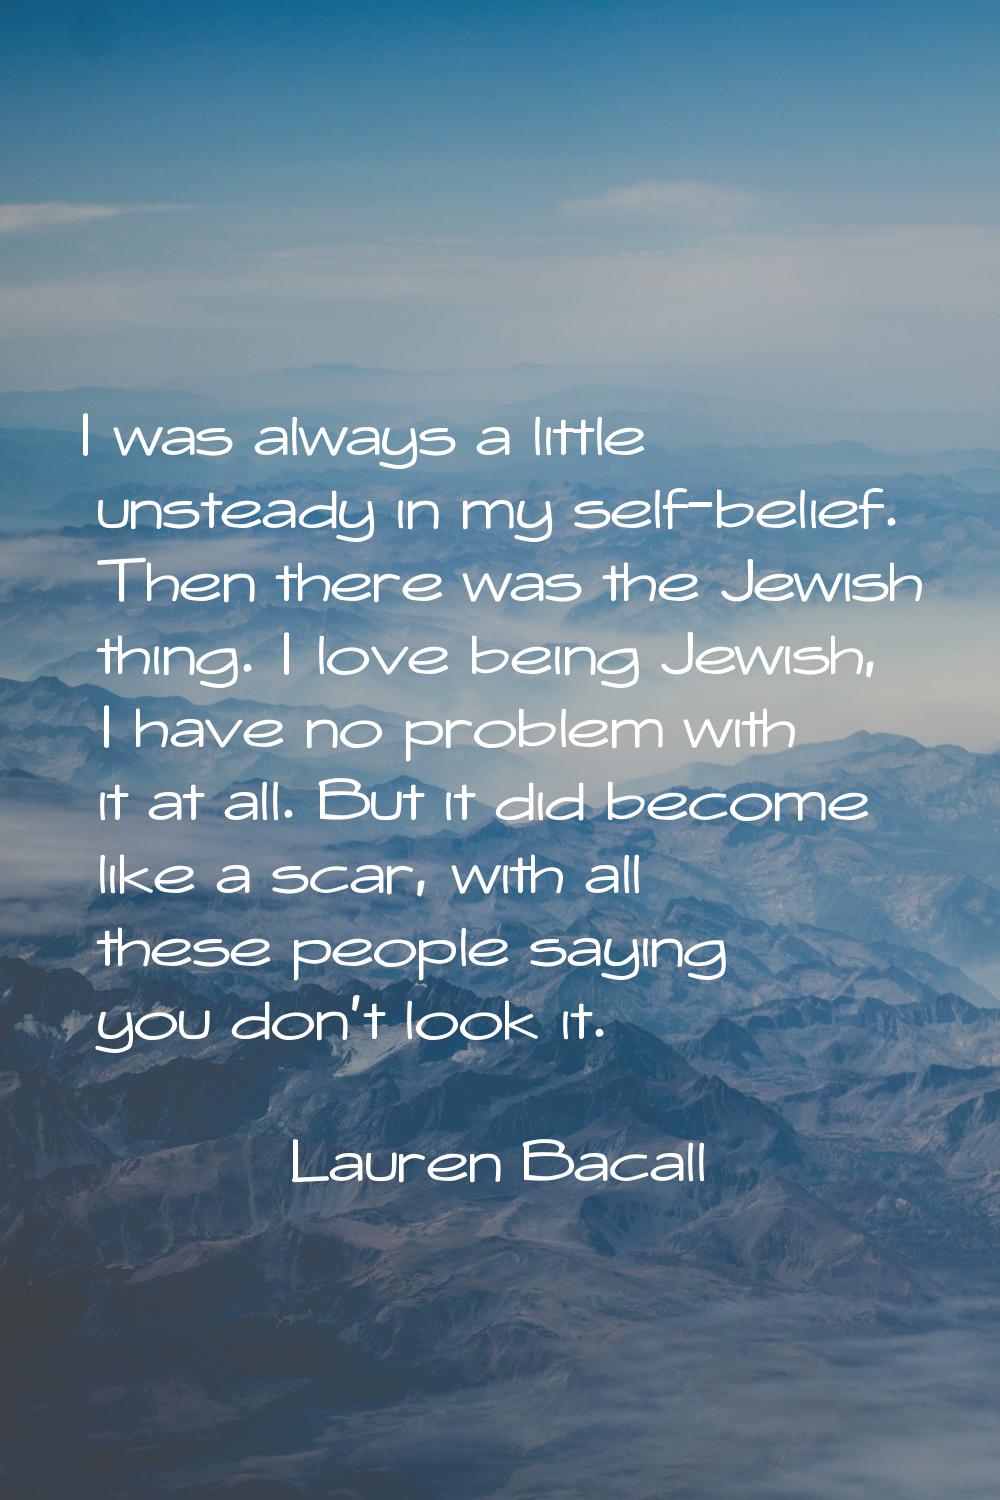 I was always a little unsteady in my self-belief. Then there was the Jewish thing. I love being Jew